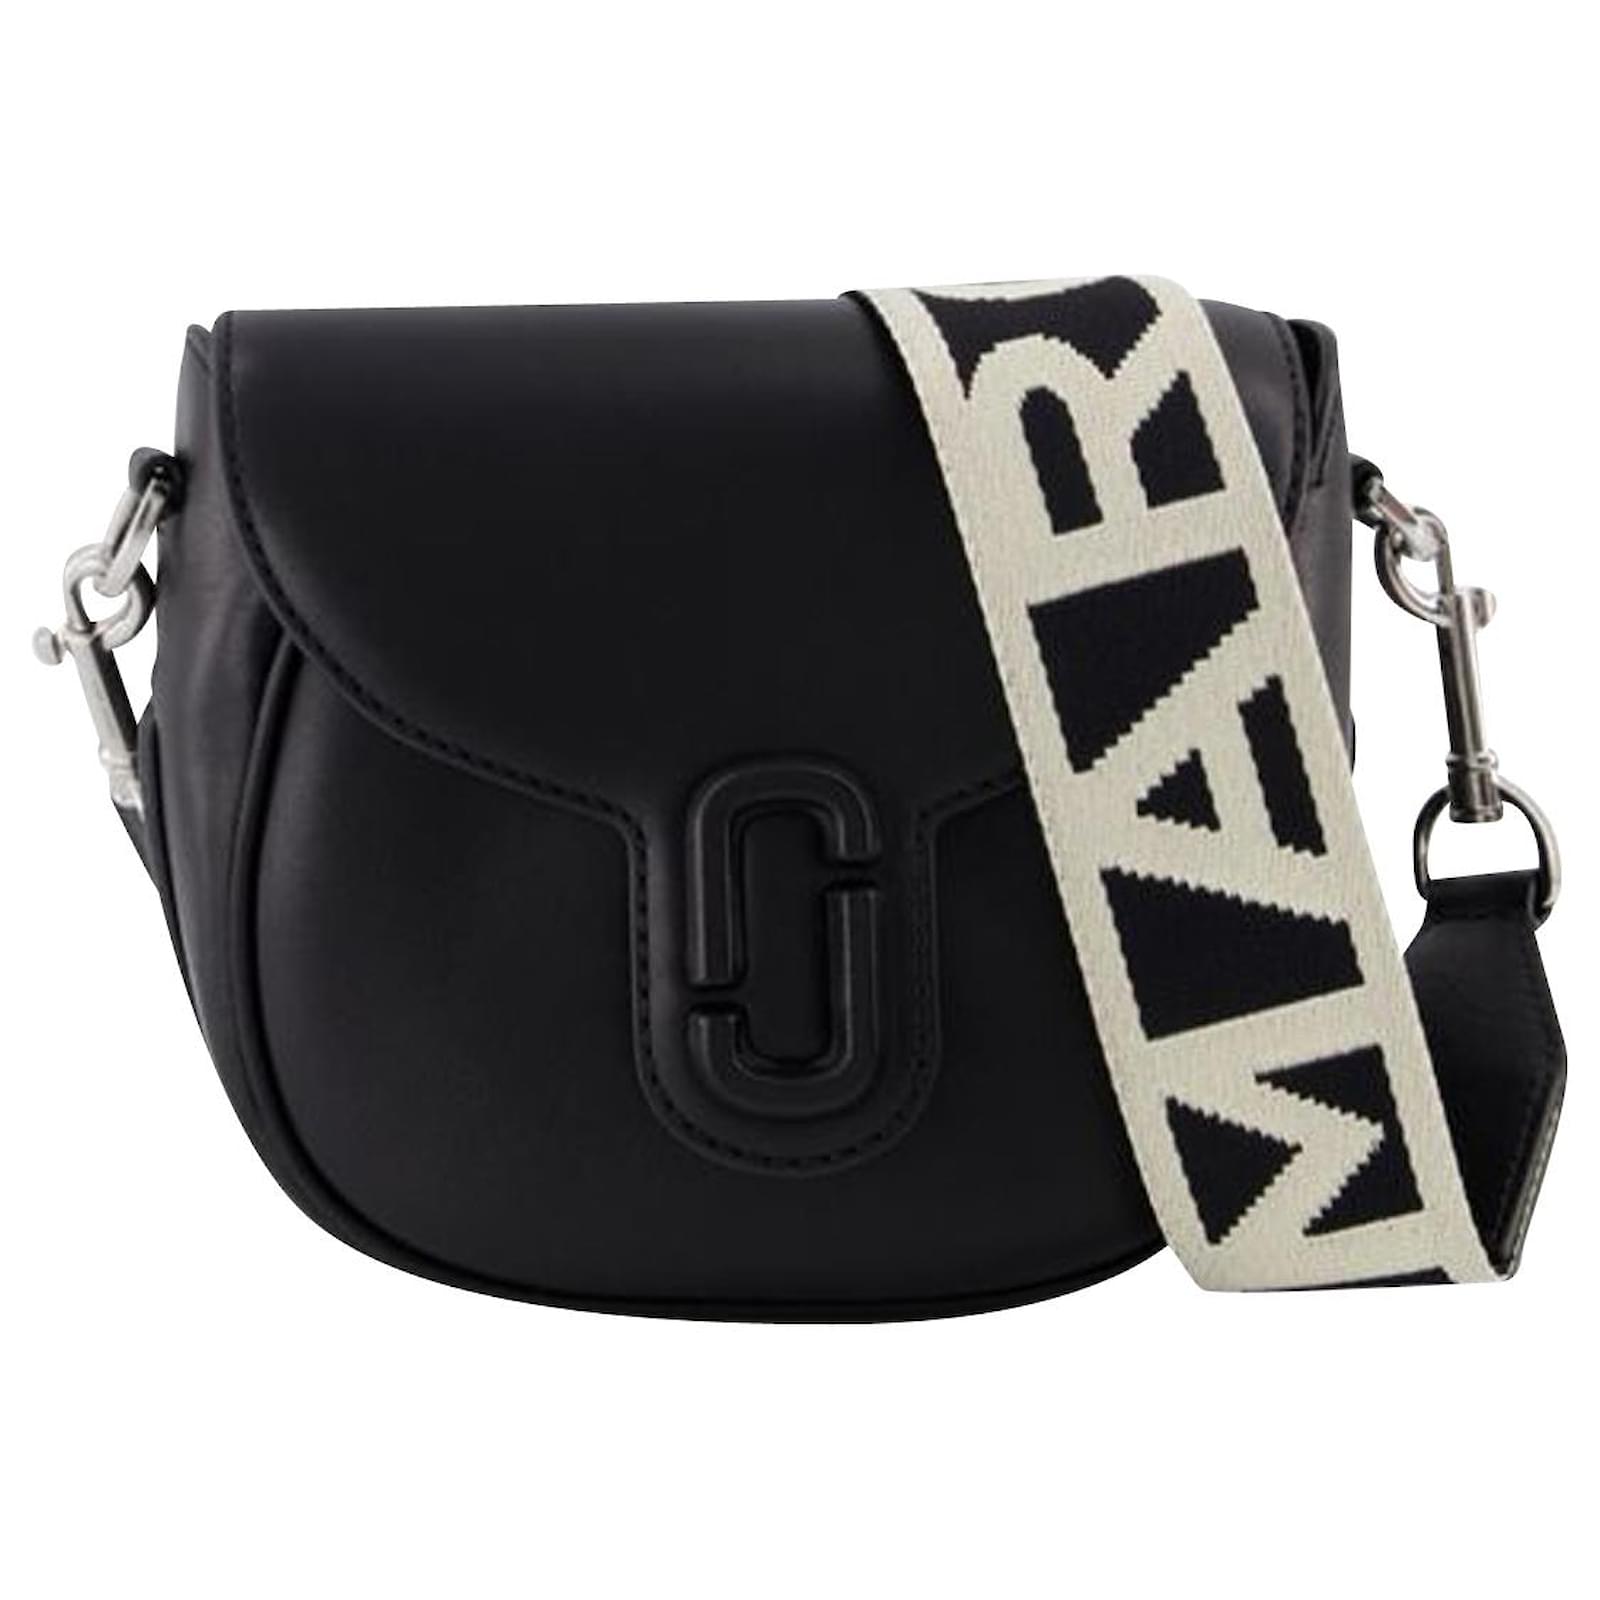 The J Marc Small Leather Saddle Bag in Black - Marc Jacobs